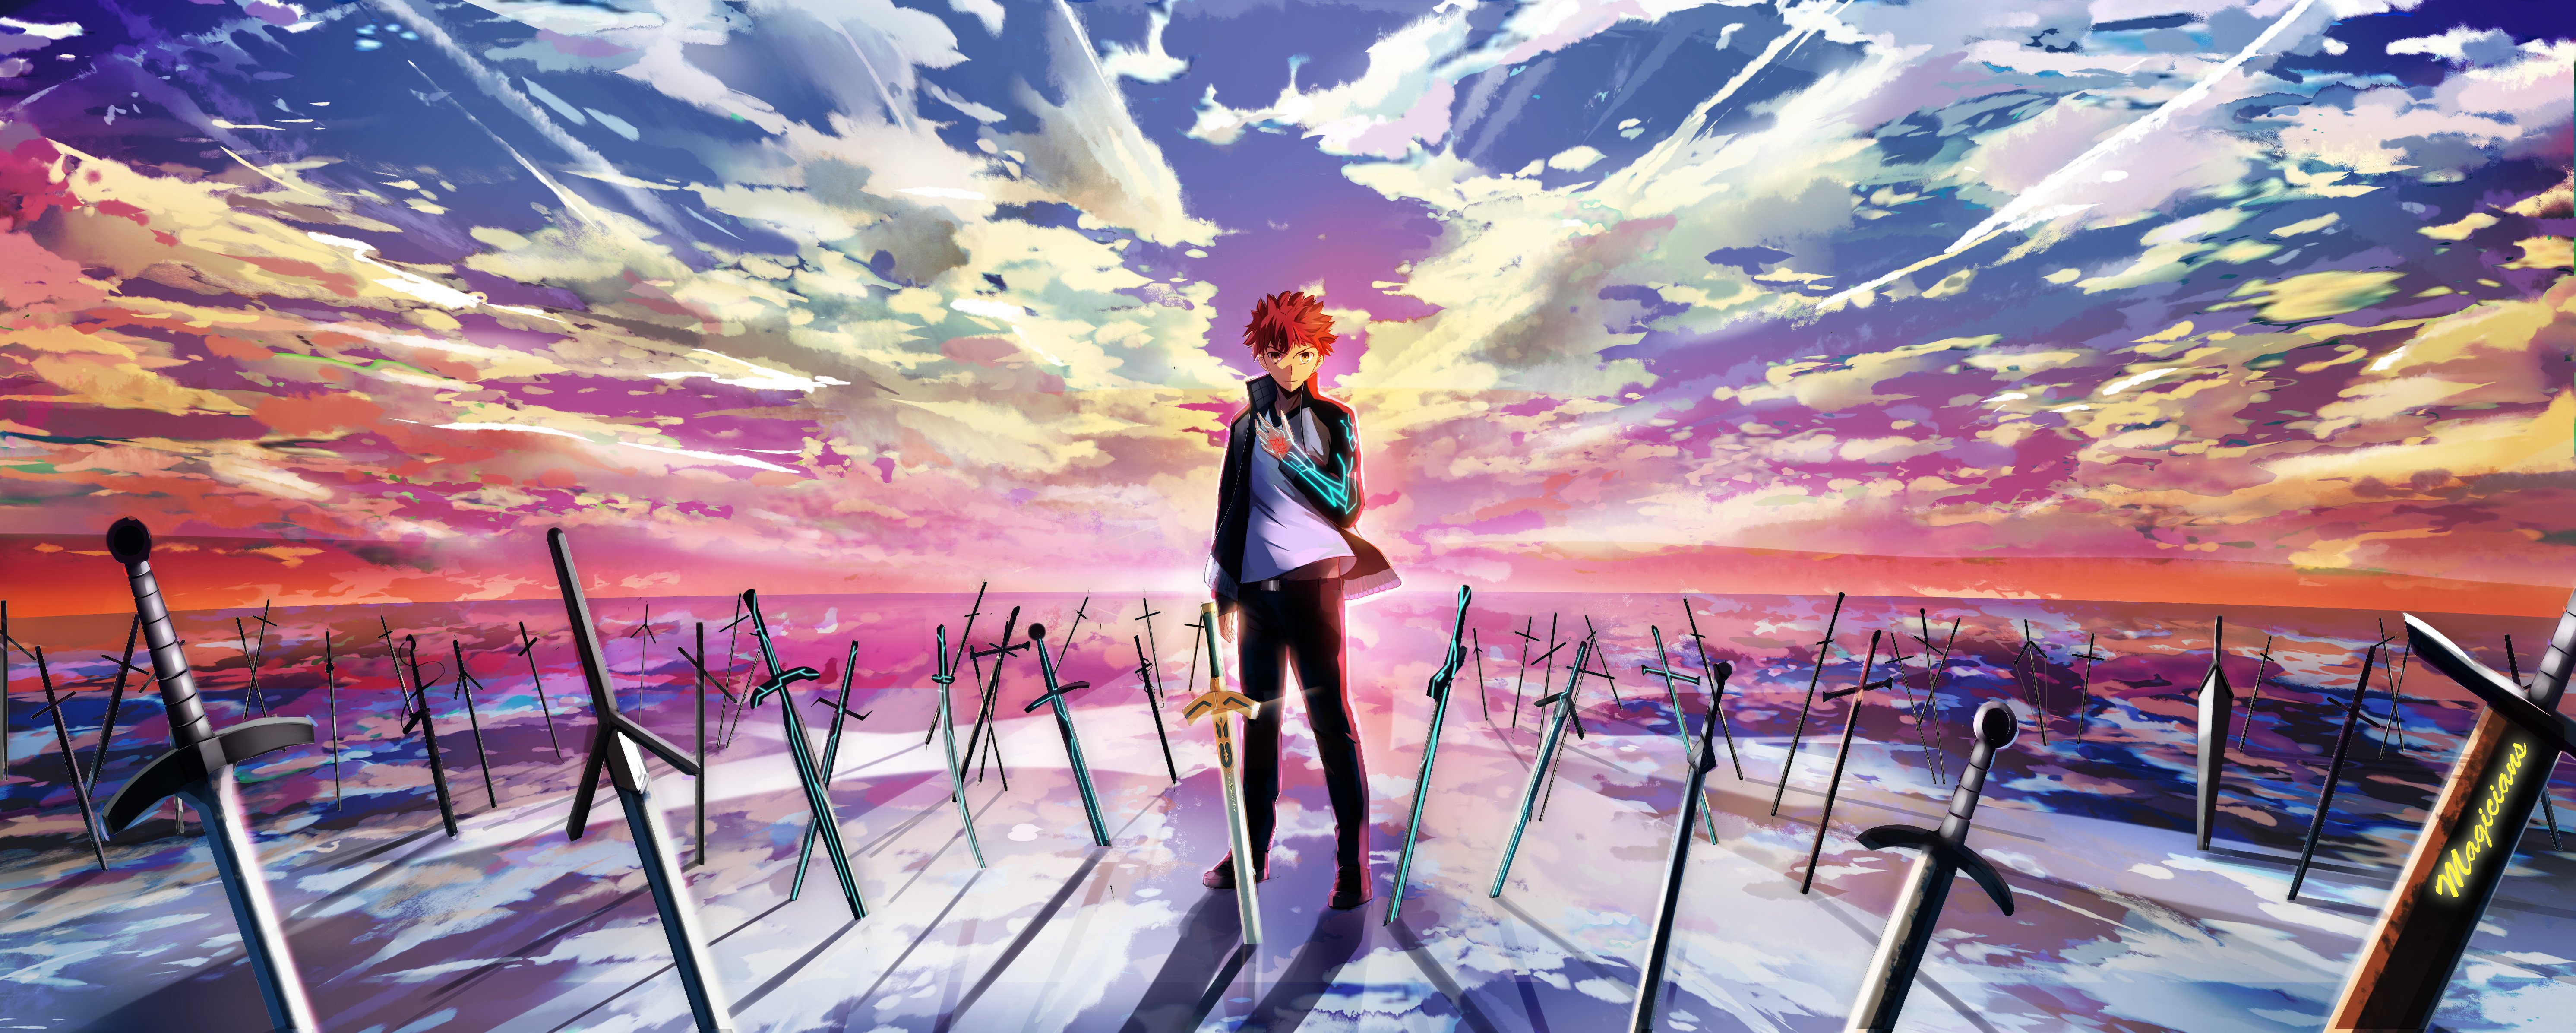 anime, All, Male, Clouds, Dualscreen, Emiya, Shirou, Fate, Stay, Night, Magicians, Male, Red, Hair, Scenic, Short, Hair, Sky, Sword, Weapon Wallpaper